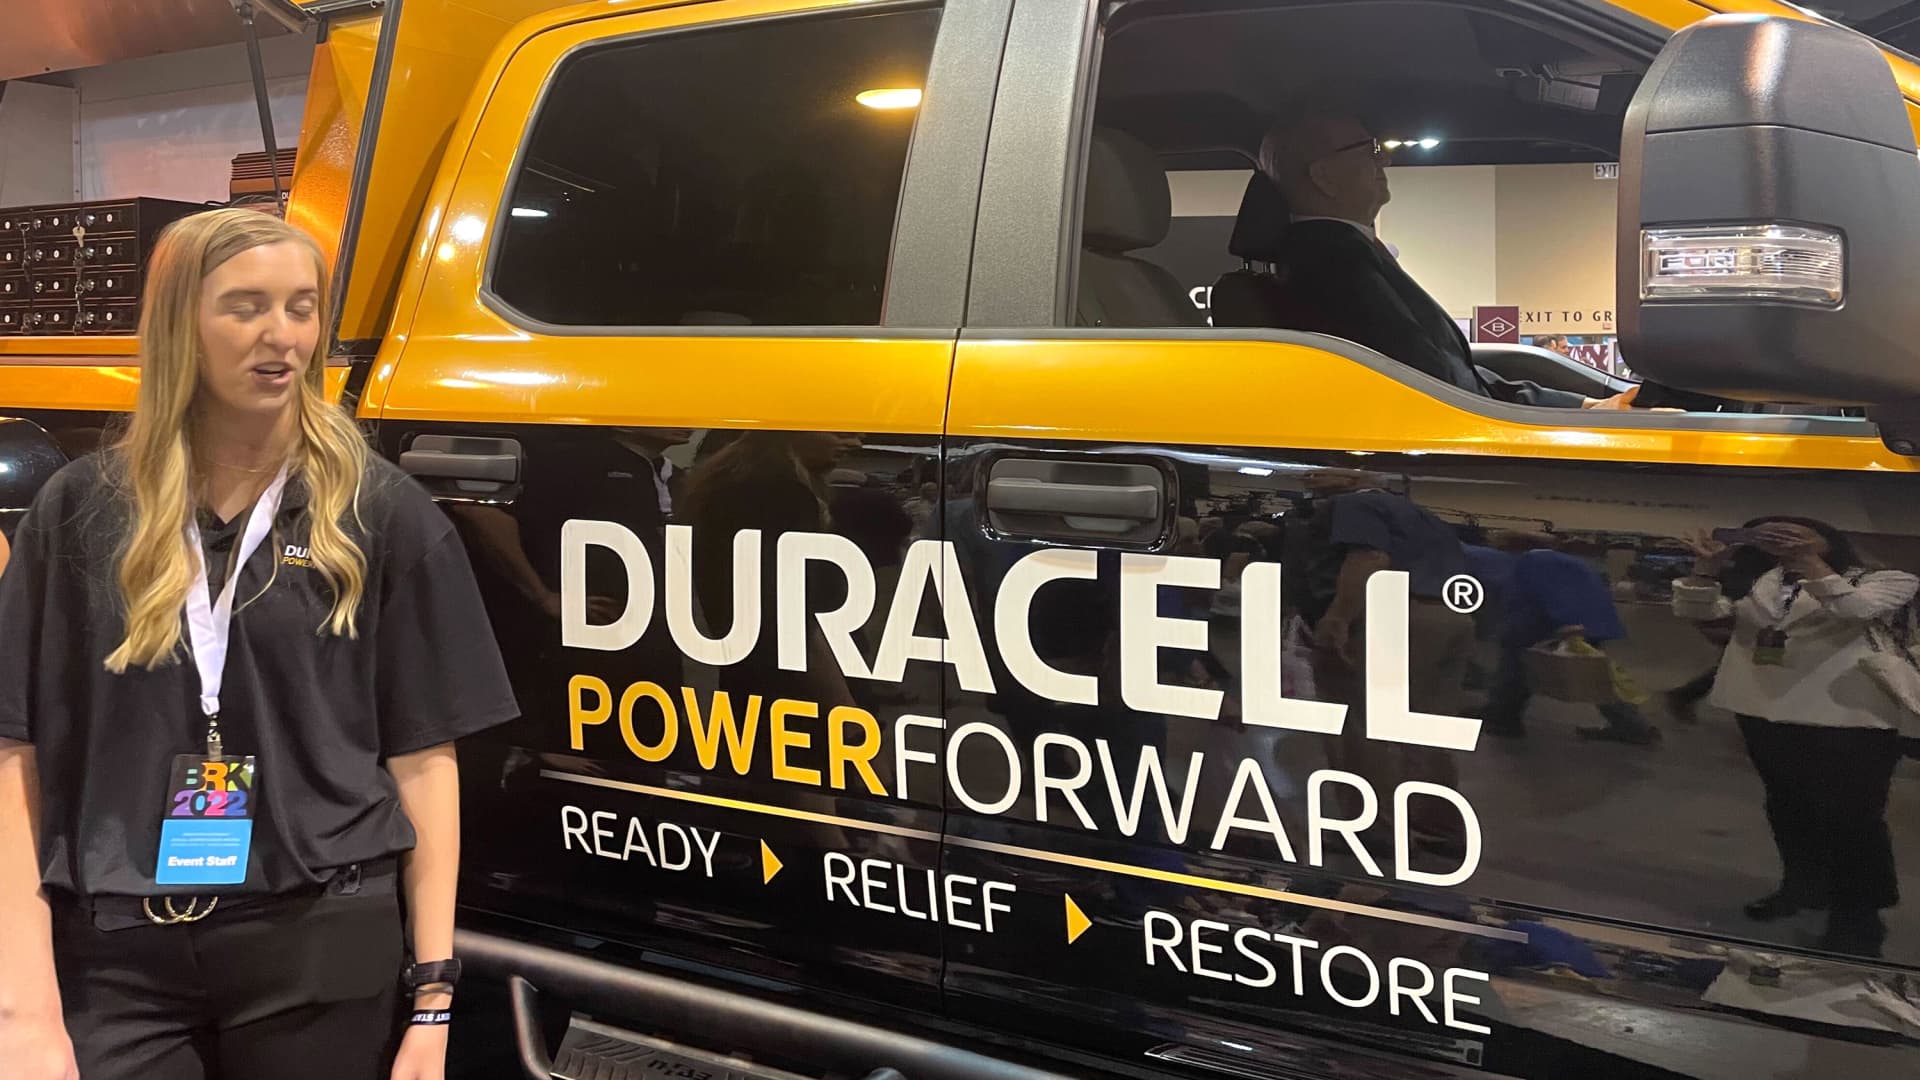 A display for Duracell at the Berkshire Hathaway Annual Shareholder Meeting in Omaha, Nebraska.